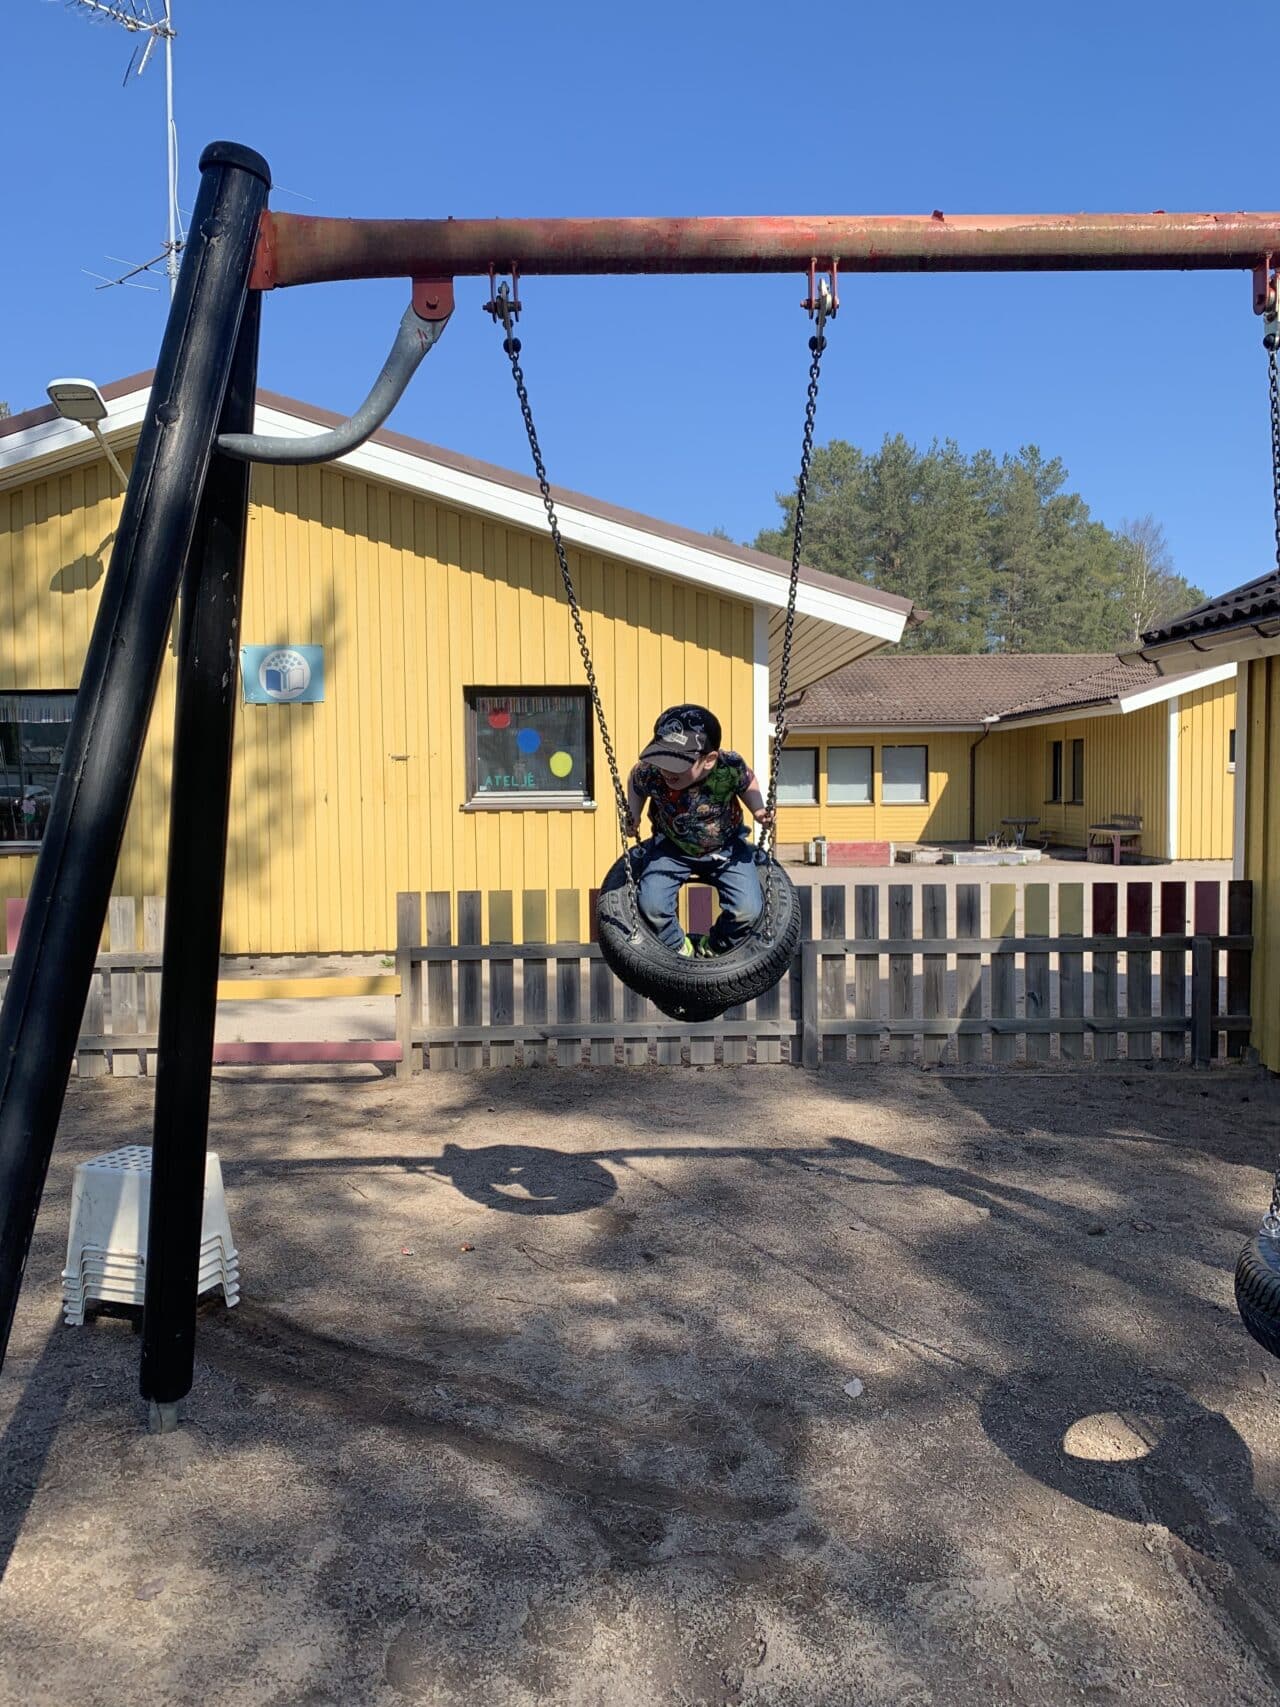 Child Playing In Kindergarten Enclosure On A Swing Set